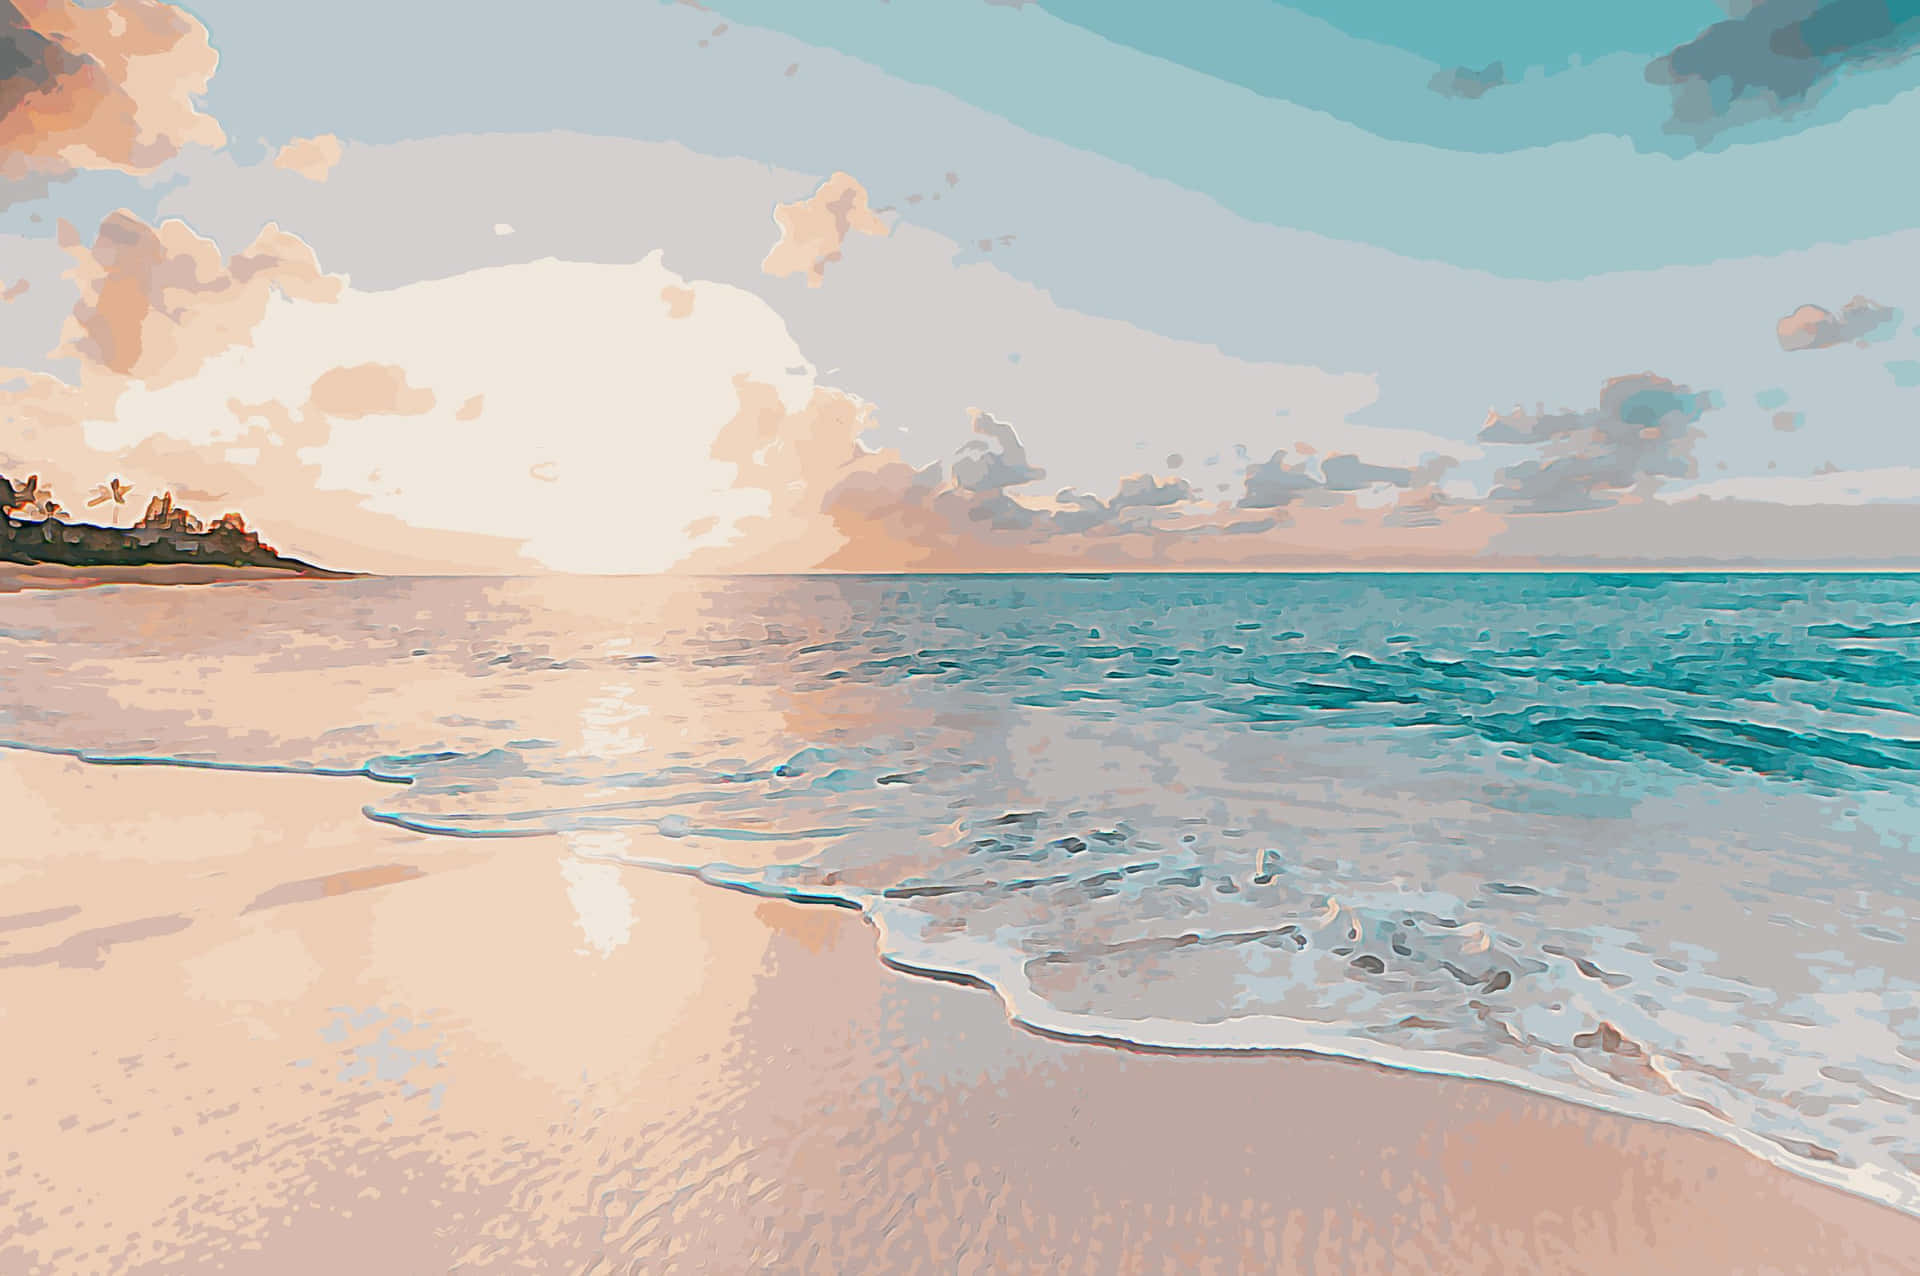 Yet Another Beach Background Part 2 by wbd on DeviantArt